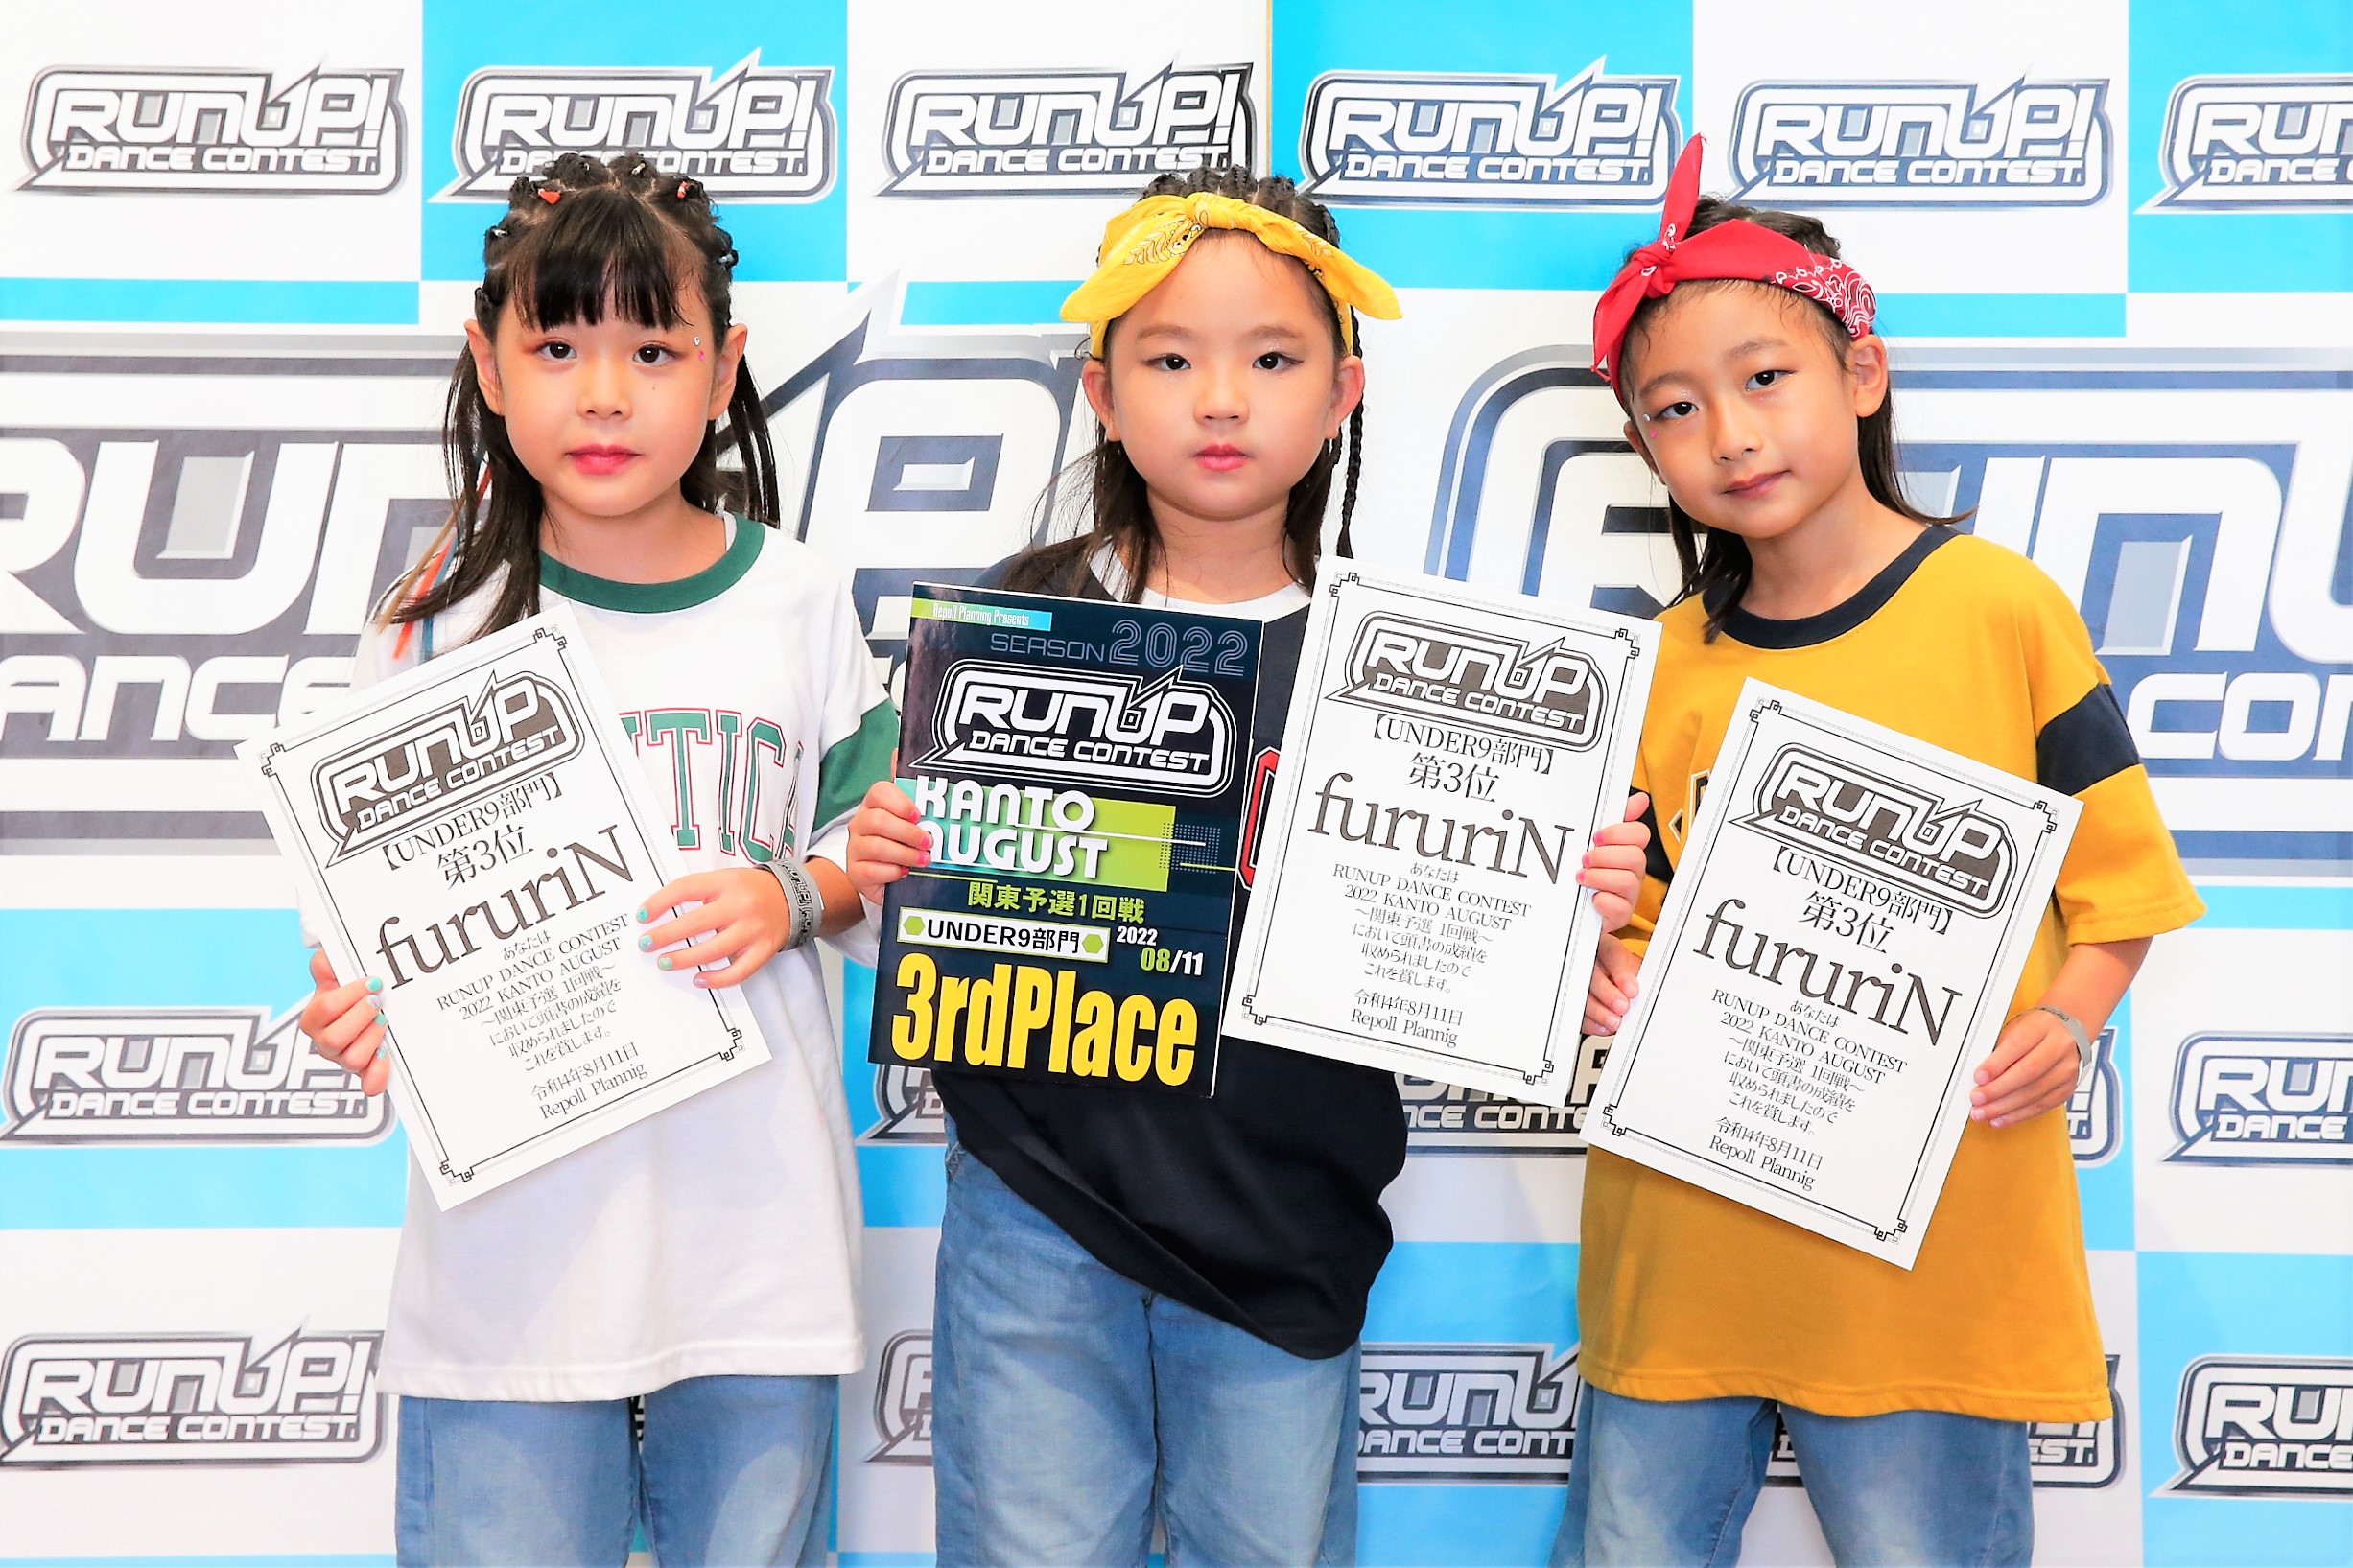 RUNUP 2022 KANTO AUGUST UNDER9 第3位 fururiN